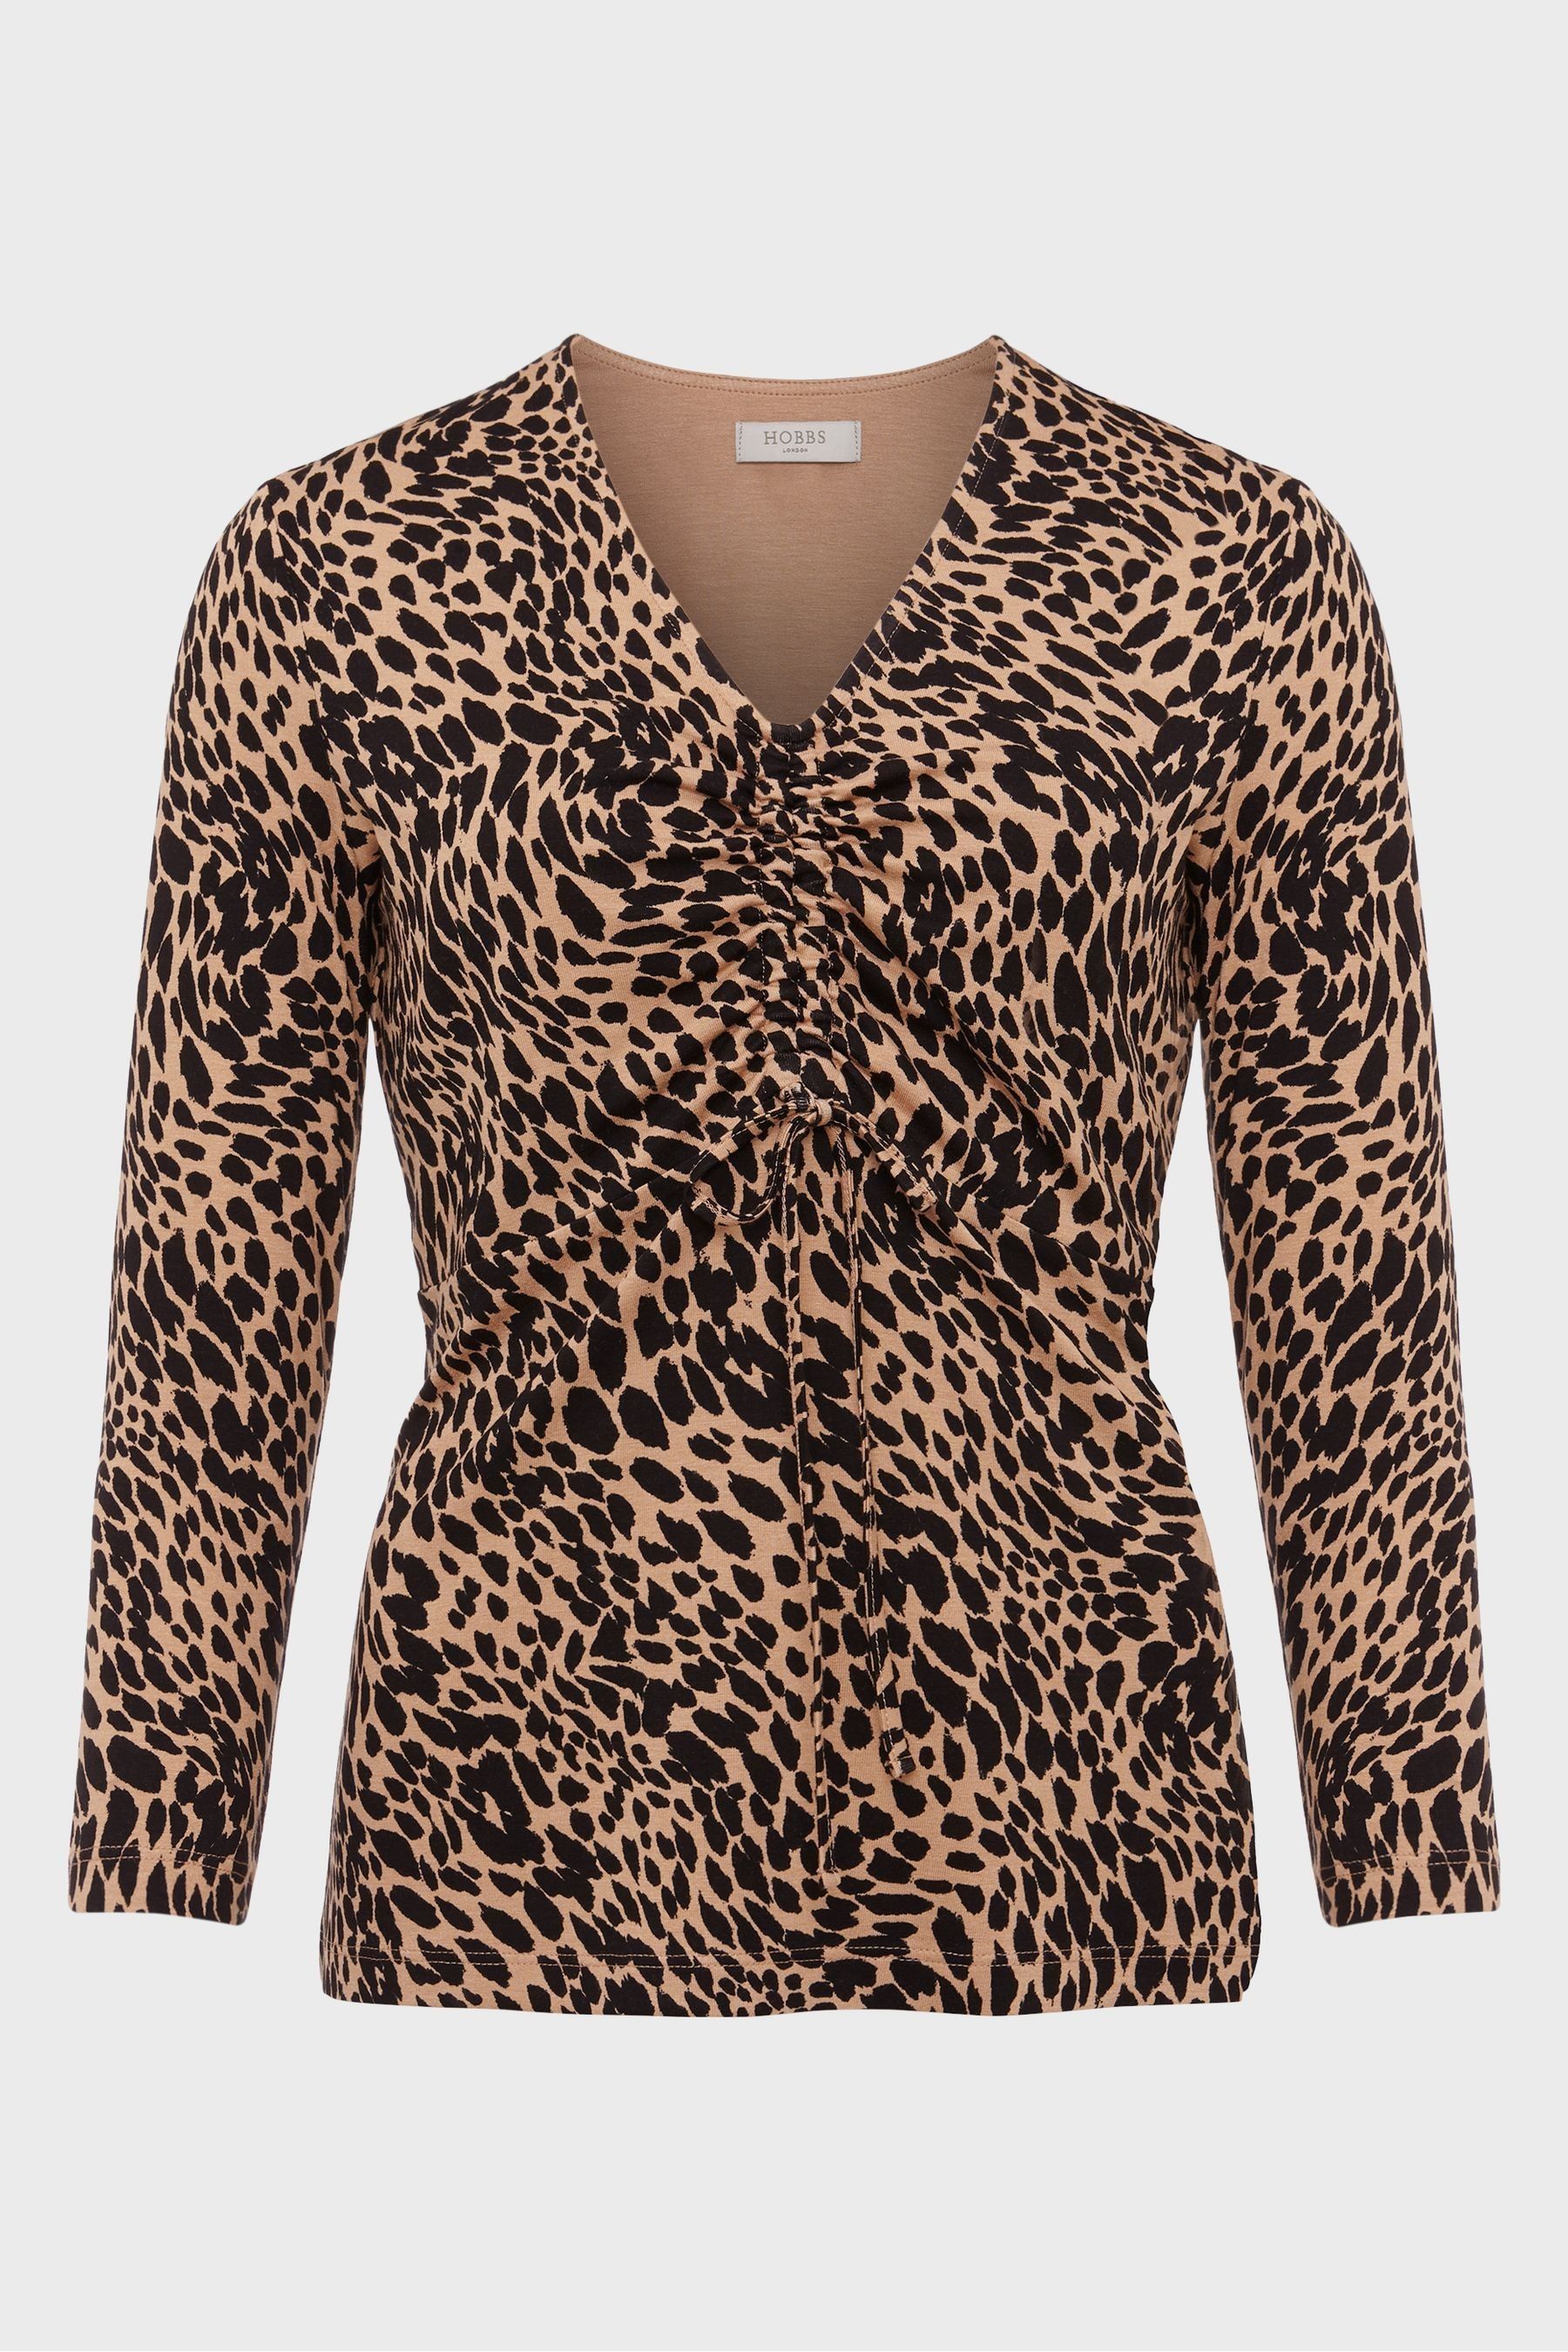 Buy Hobbs Simmy Printed Brown Top from the Next UK online shop